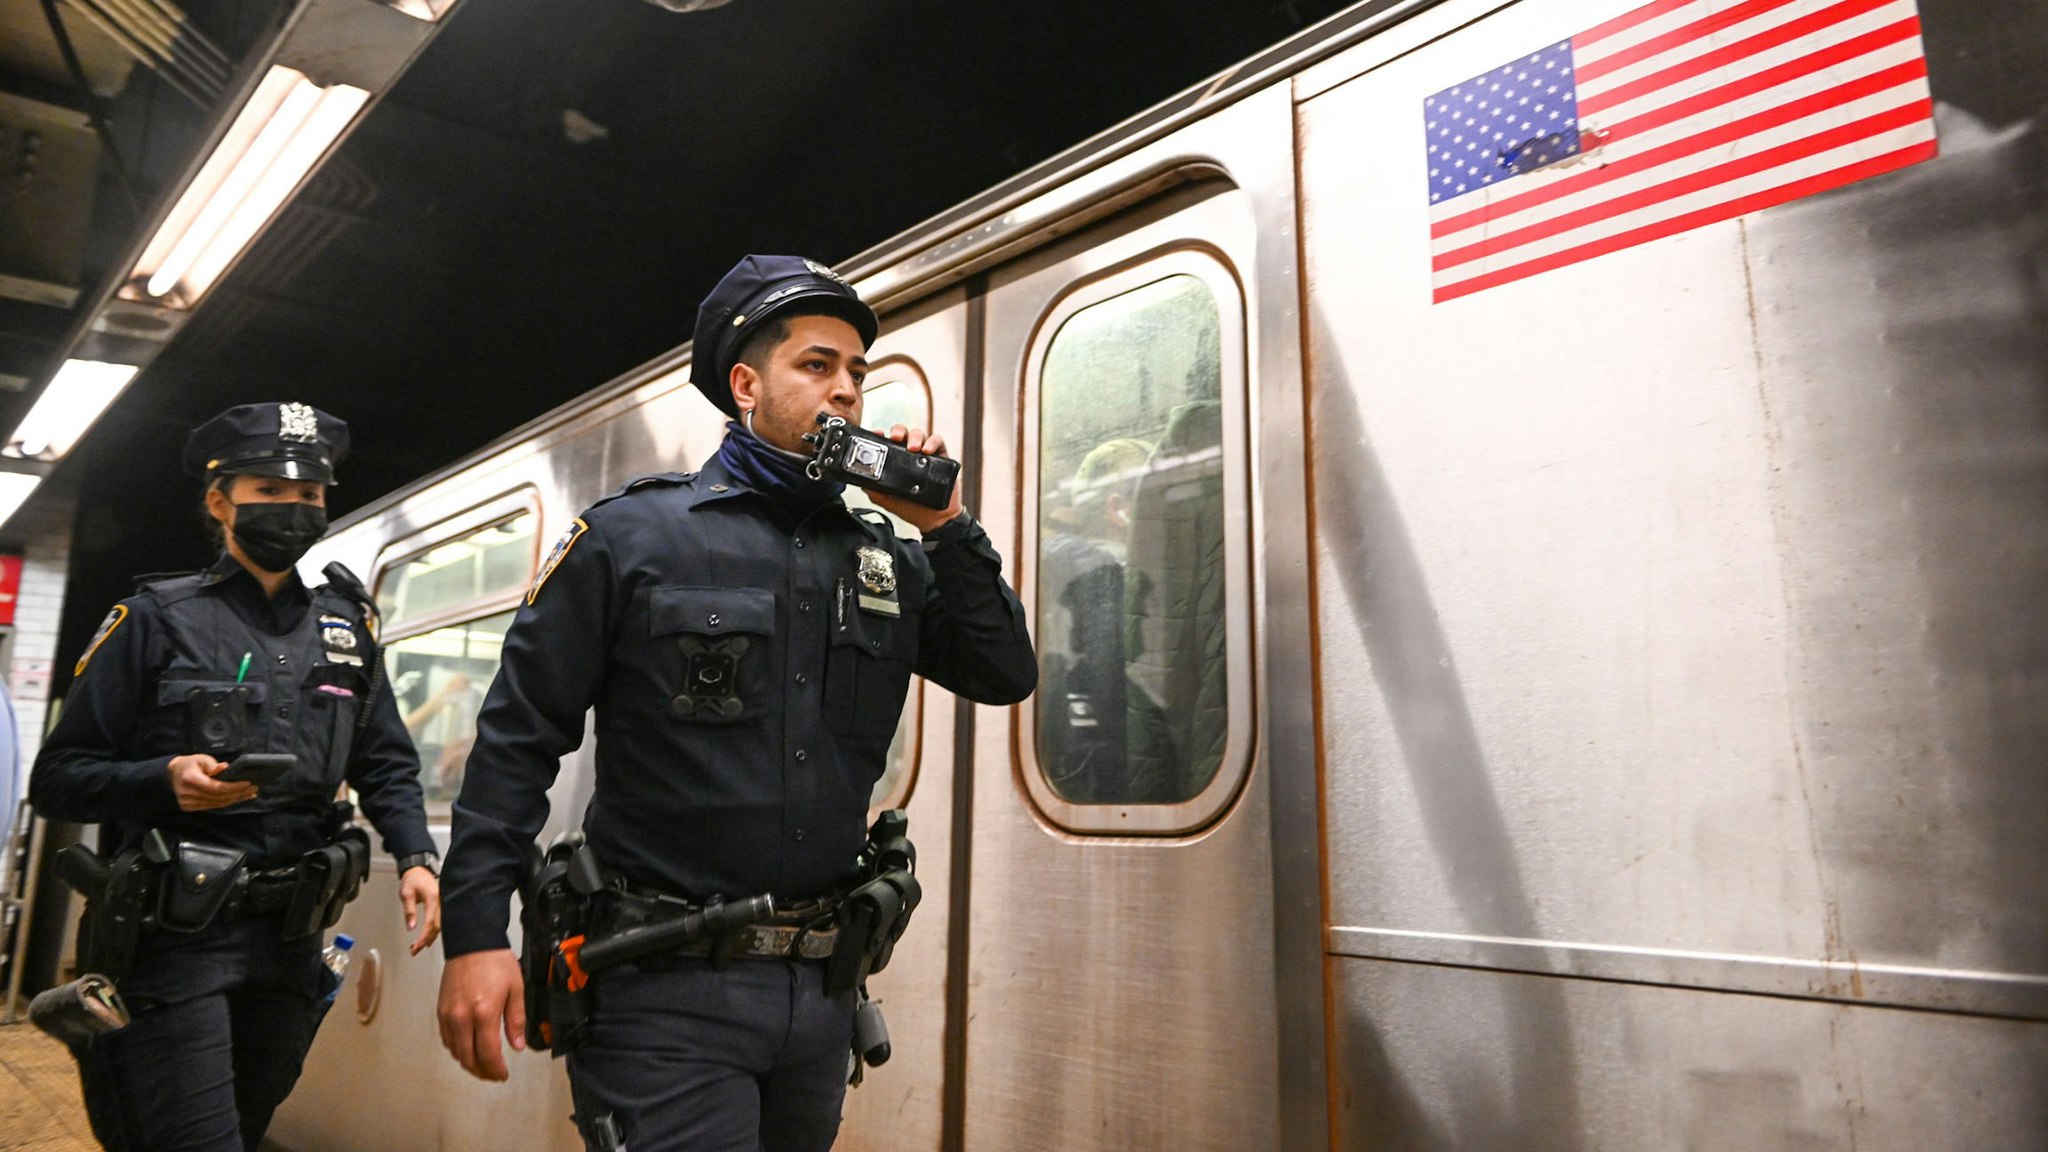 NEW YORK, NEW YORK - APRIL 12: New York City police investigate an incident on an Uptown 4 subway after an emergency brake was pulled near Union Square on April 12, 2022 in New York City. Security has been heightened after a gunman in a gas mask and construction vest set off a smoke grenade and opened fire on a subway today at the 36th Street and Fourth Avenue station in the Sunset Park neighborhood of Brooklyn. At least 29 people were injured - 10 of them by gunshot - amid a fusillade of 33 rounds, according to reports. Authorities have named 62-year-old Philadelphia man Frank R. James as a person of interest.